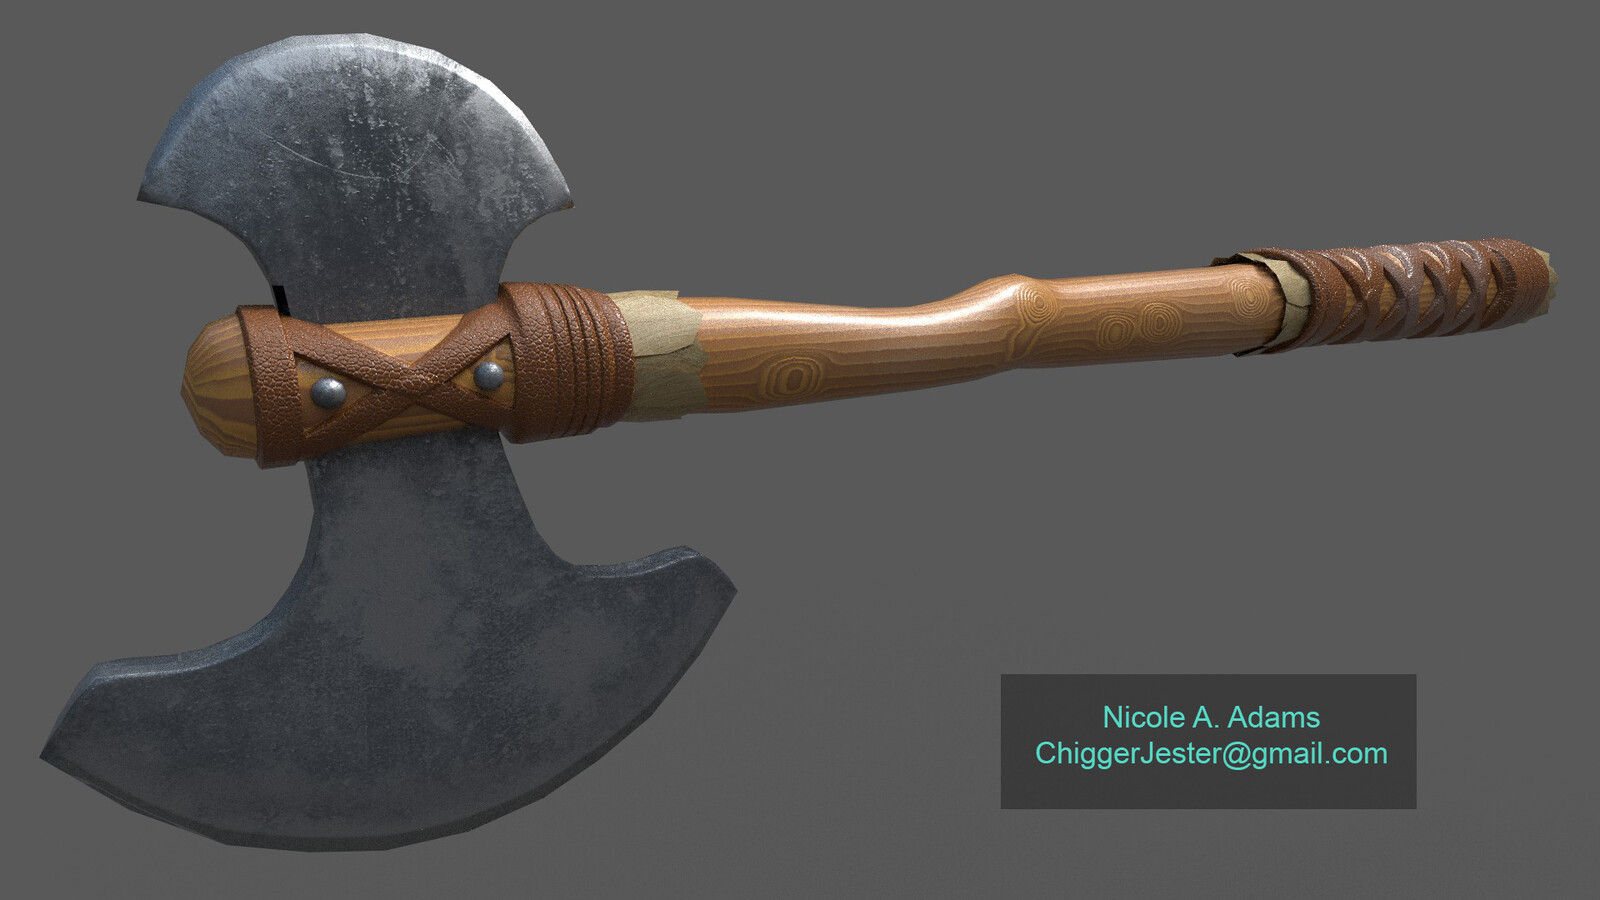 The final IRay Render after adjusting some base colors, roughness, and opacity settings. I also added some subtle wear to the leather portion handle near the bottom, as well as the choke of the wood.